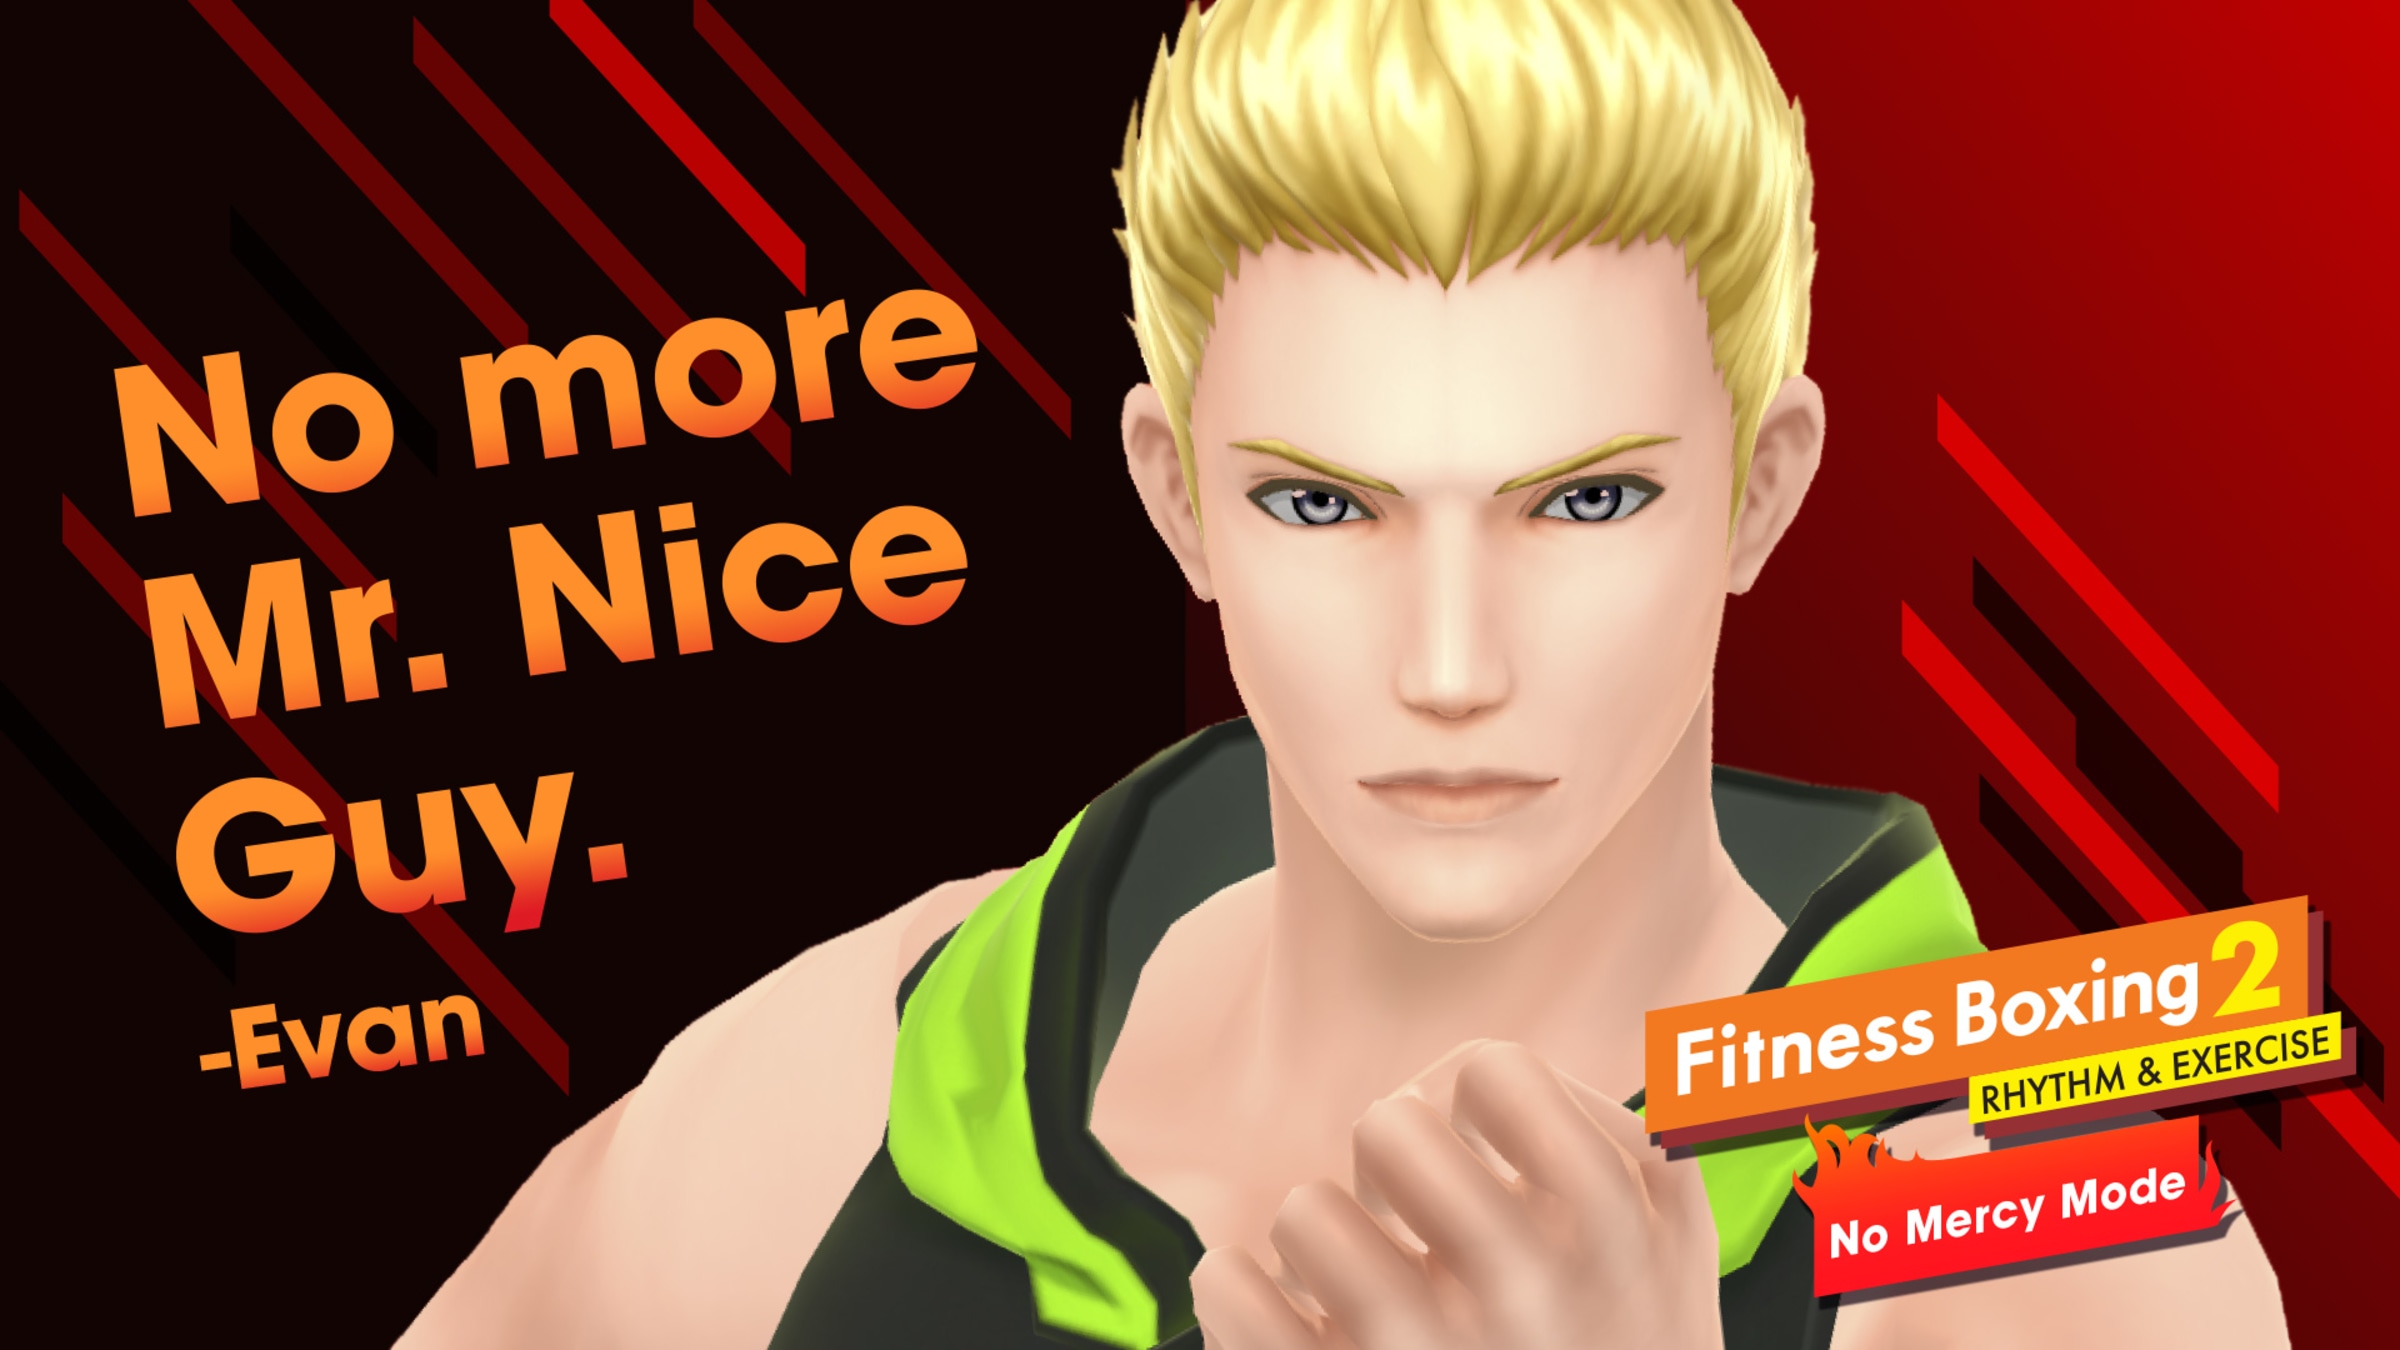 Fitness Boxing 2: Evan Nintendo Site Switch Exercise No Mercy & for Official Rhythm Nintendo intensity: 